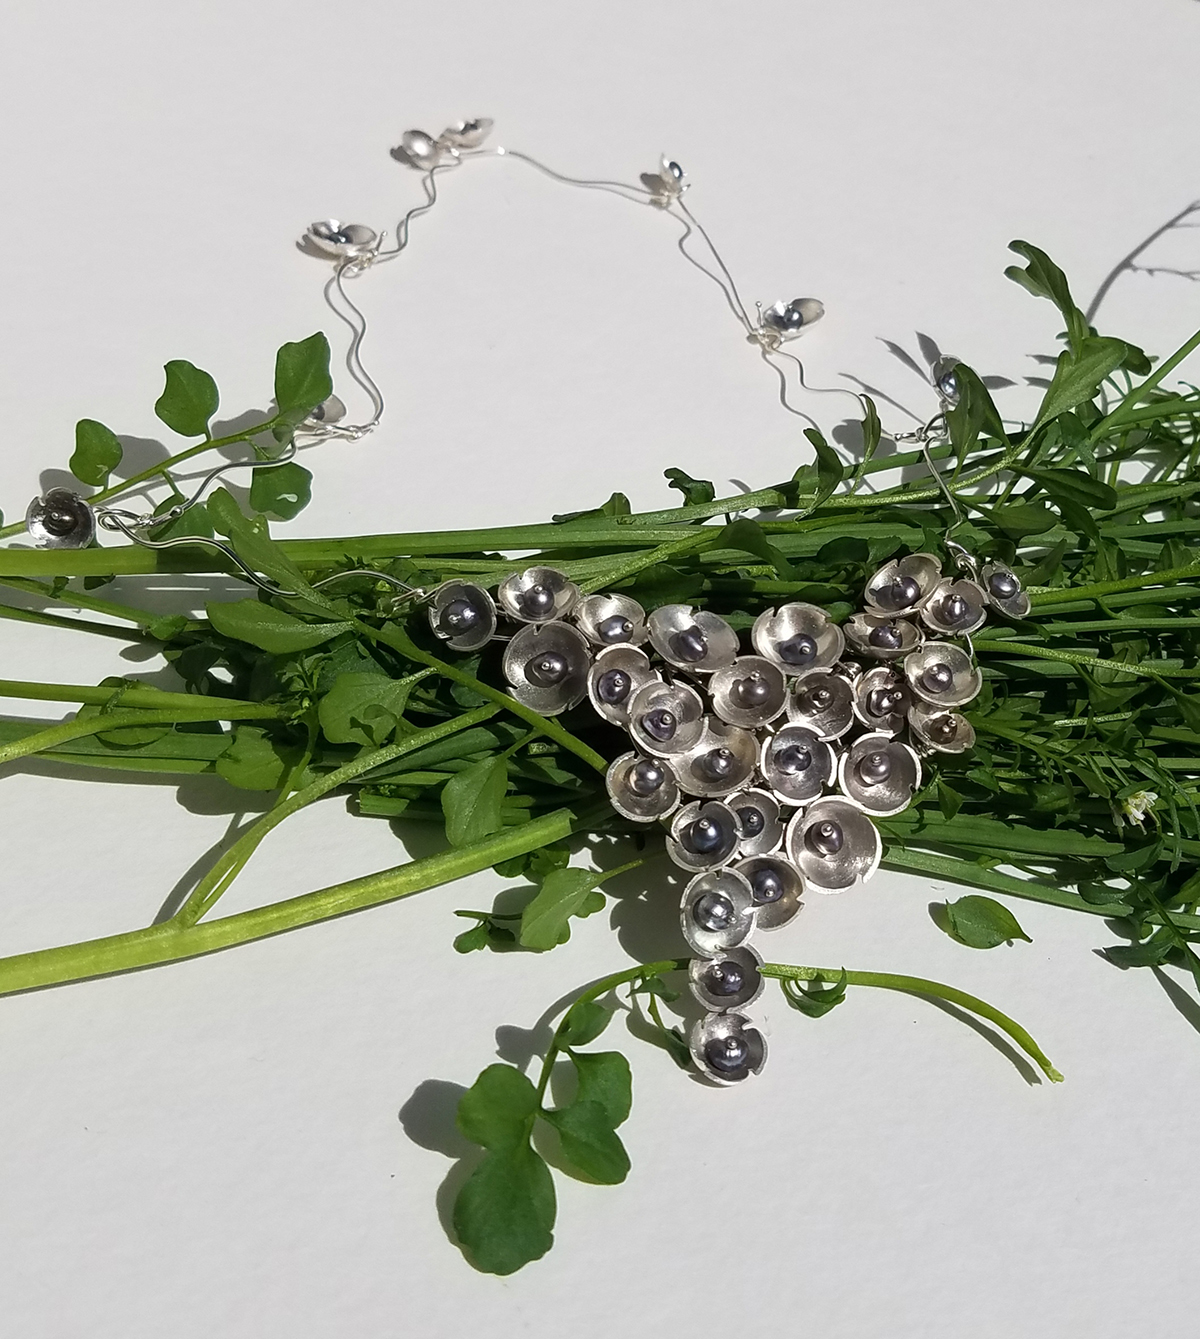 A necklace tied to a bouquet of flowers.